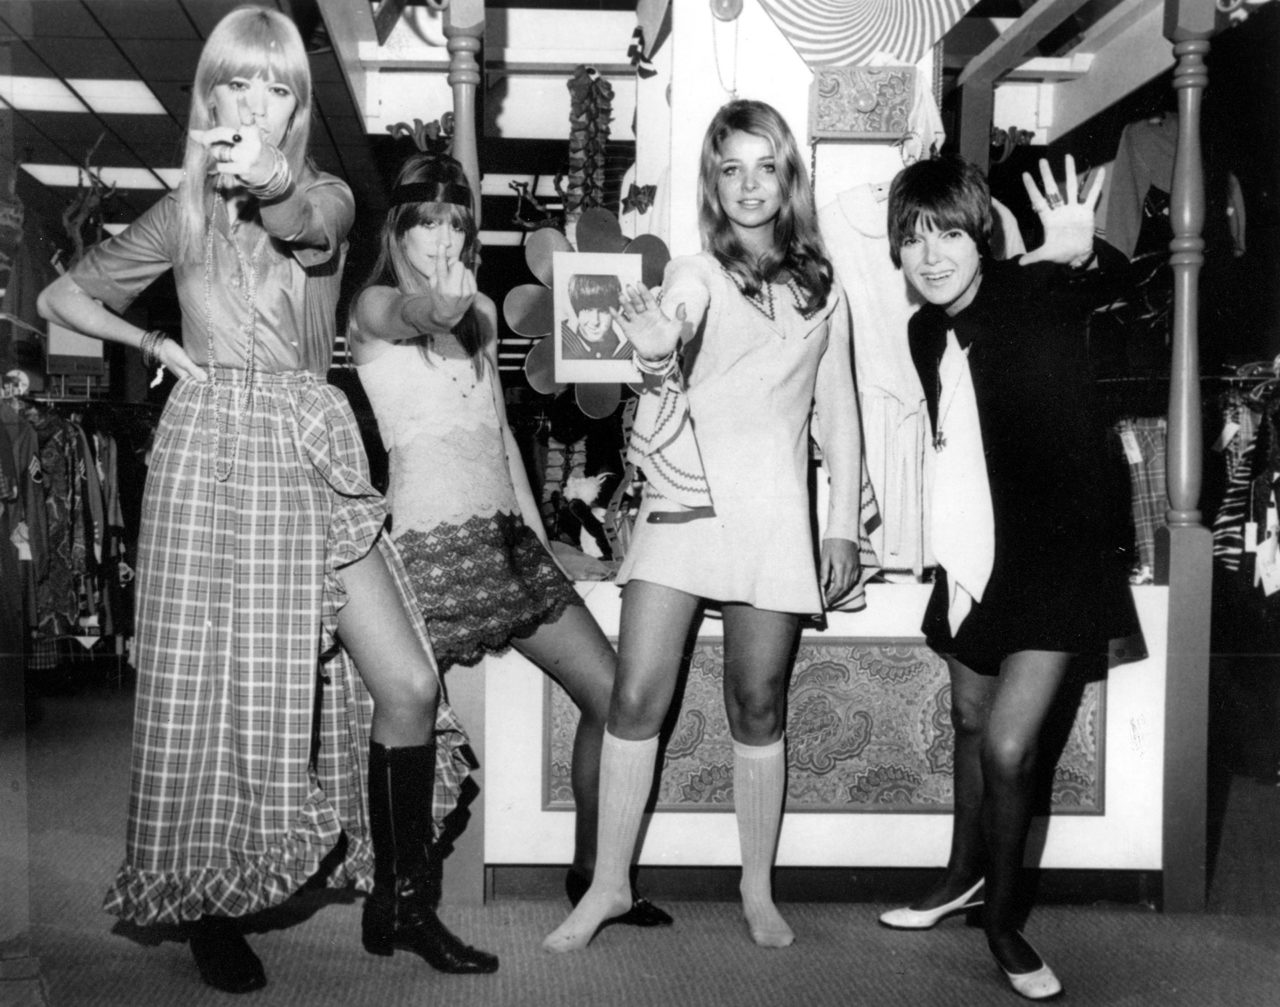 Three models and designer Mary Quant wearing her mod fashions in Little Rock, Arkansas.